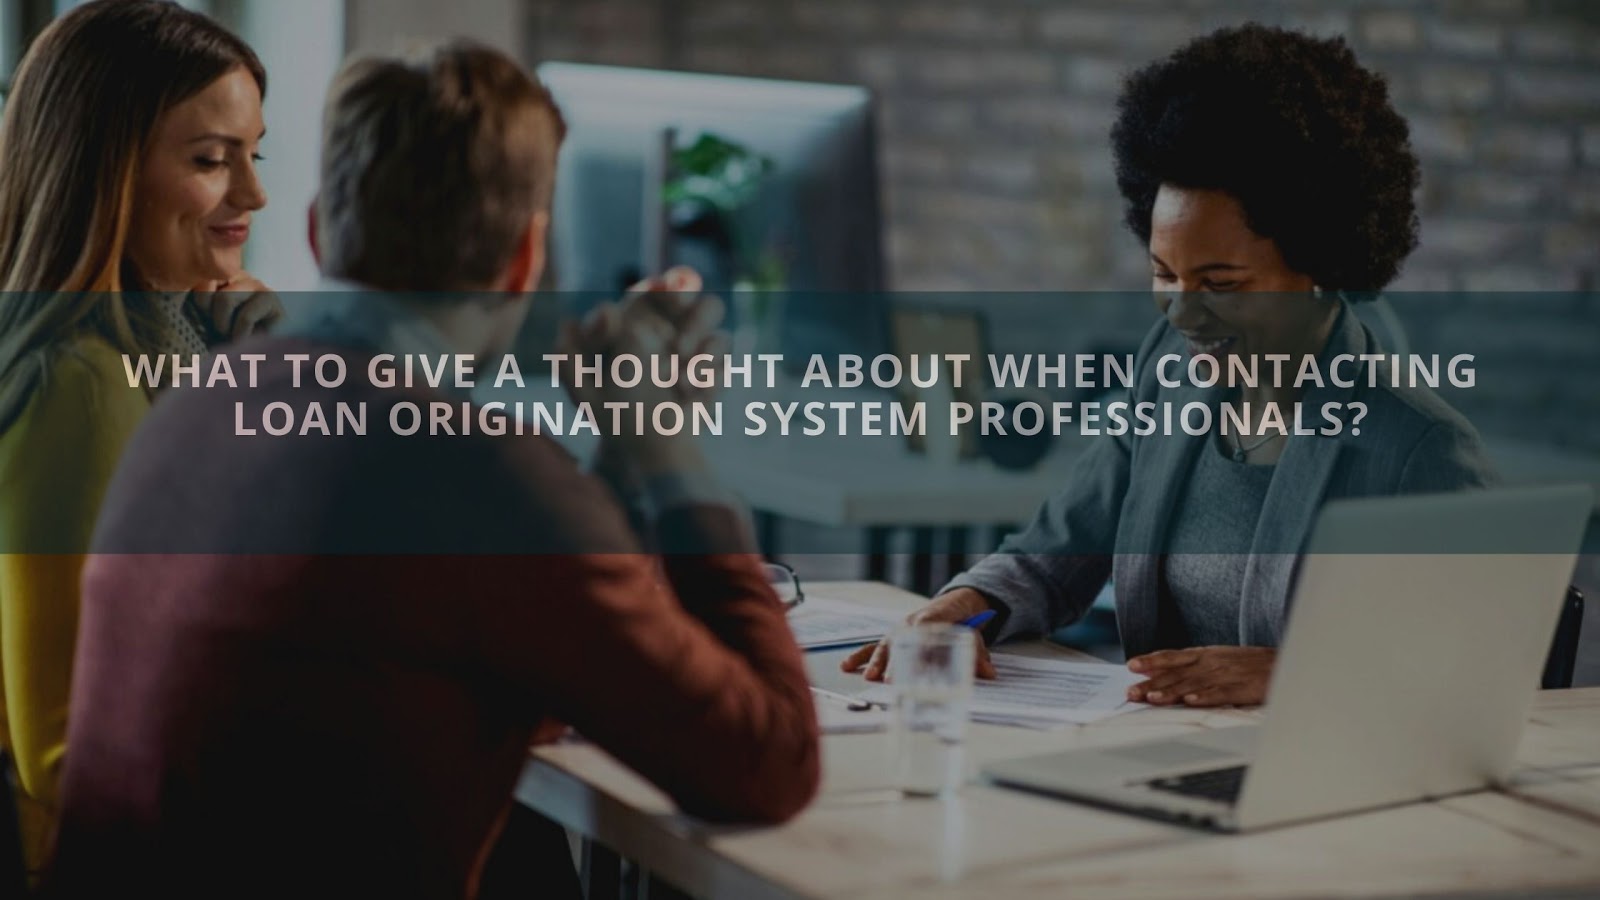 What To Give A Thought About When Contacting Loan Origination System Professionals_